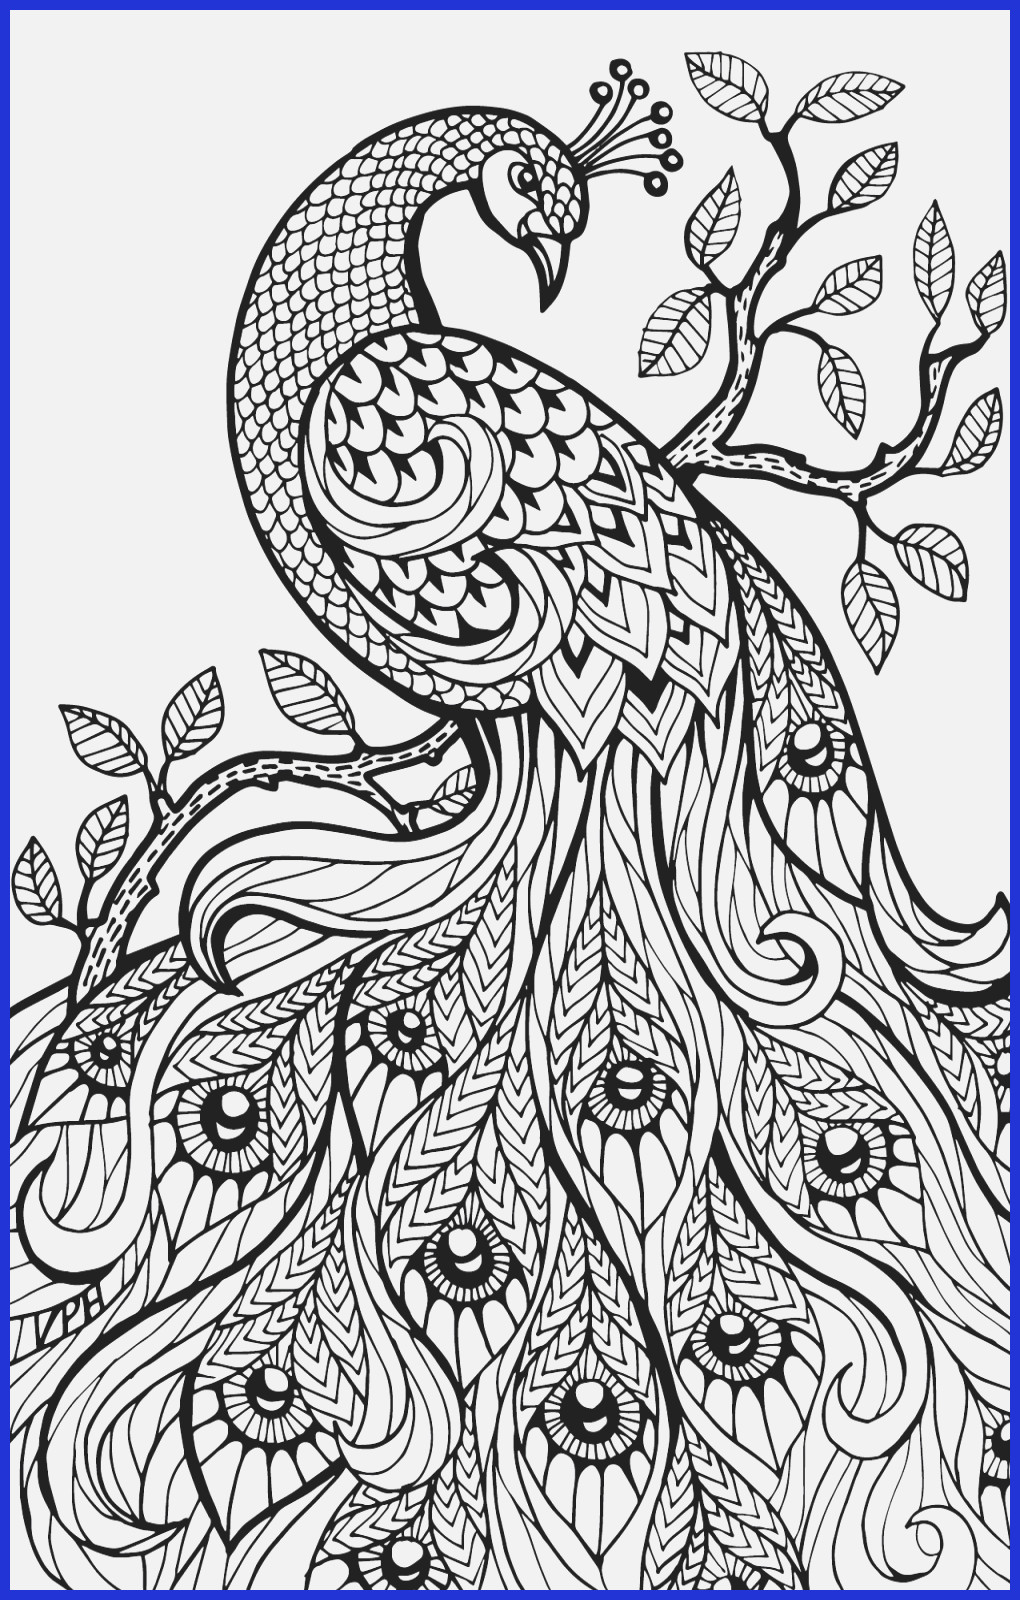 Coloring Book For Adults Watercolor - 1500+ SVG File for Silhouette